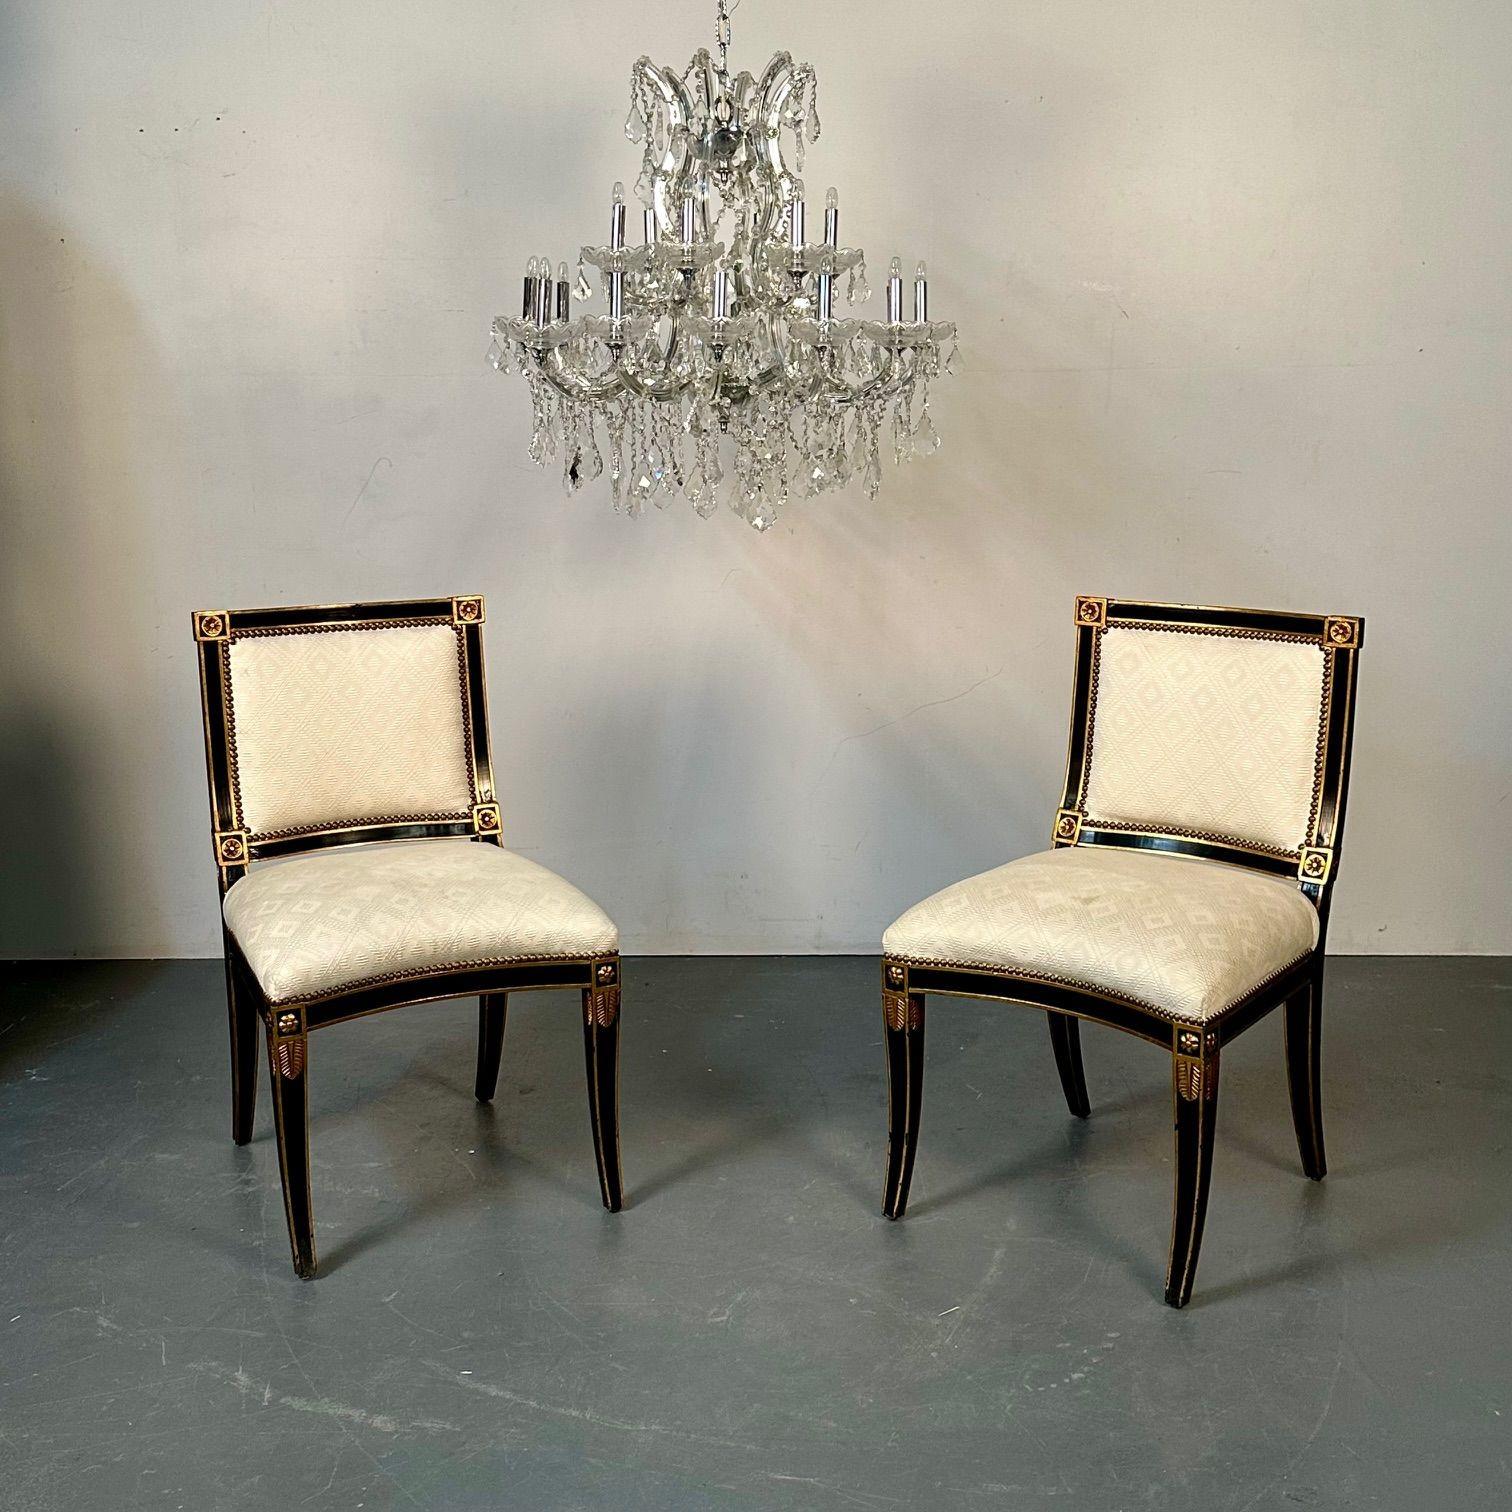 Pair of Louis XVI Maison Jansen Style Dining / Side Chairs, Ebony and Giltwood

This finely crafted pair of Italian ebonized side chairs each having sprayed legs with gilt decorative over tones. The pair with square padded and tacked backs and